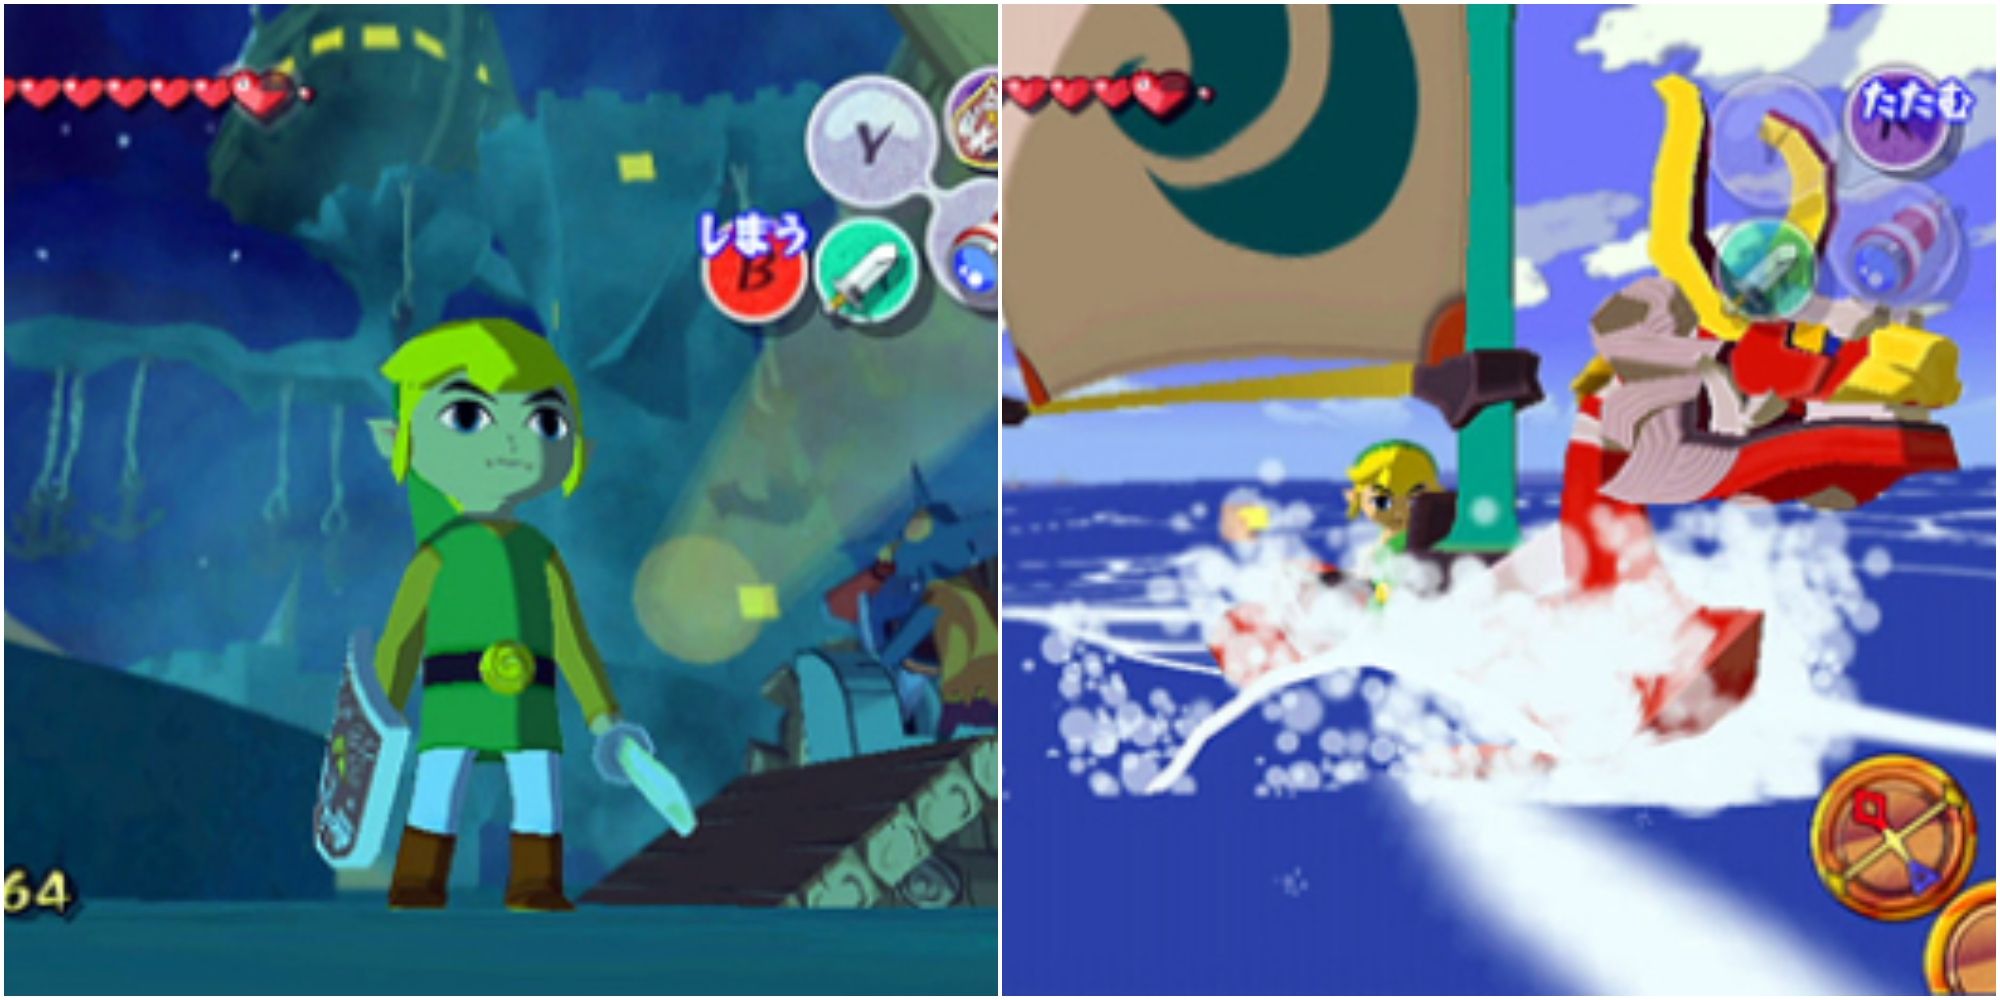 The Wind Waker Gamecube: Link standing with his sword and Link on a boat